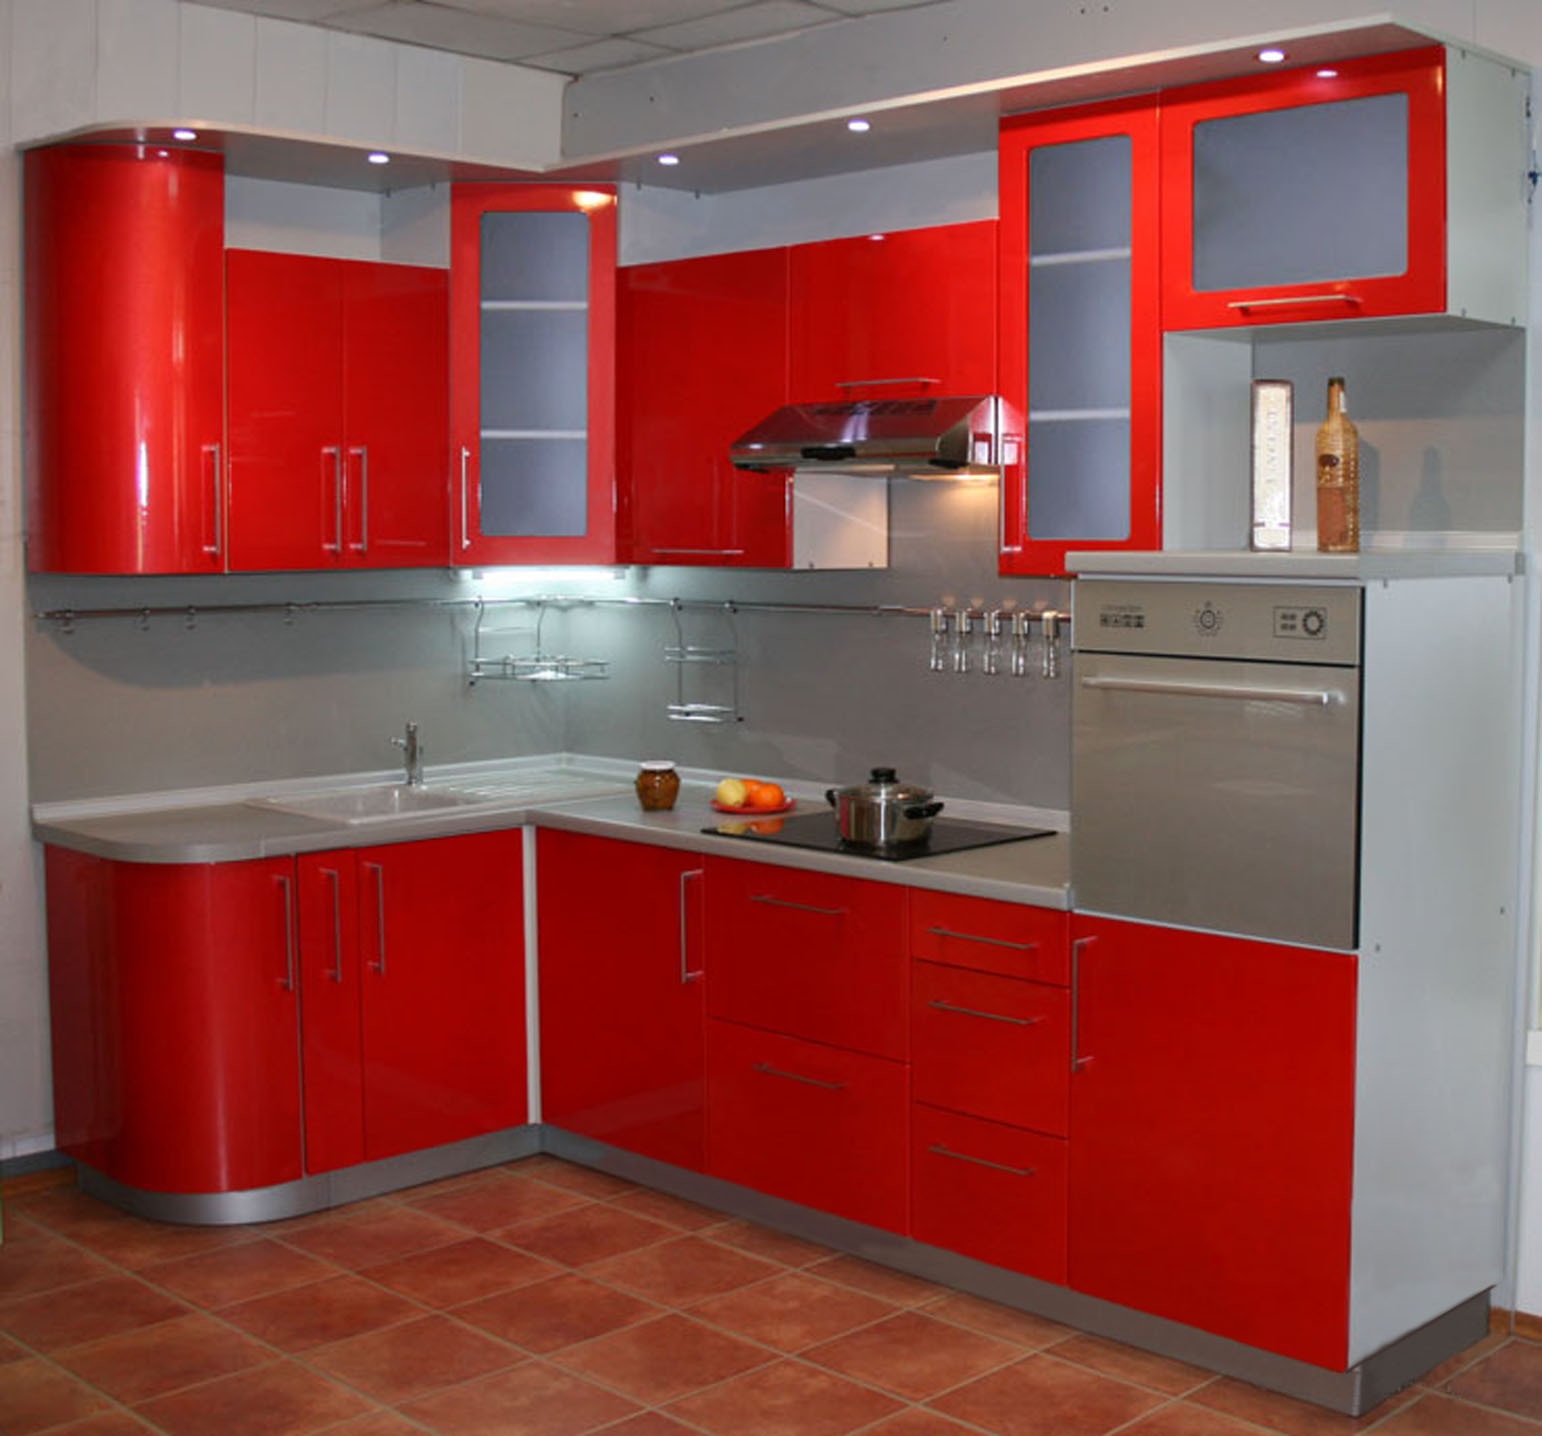 An example of a bright corner kitchen style